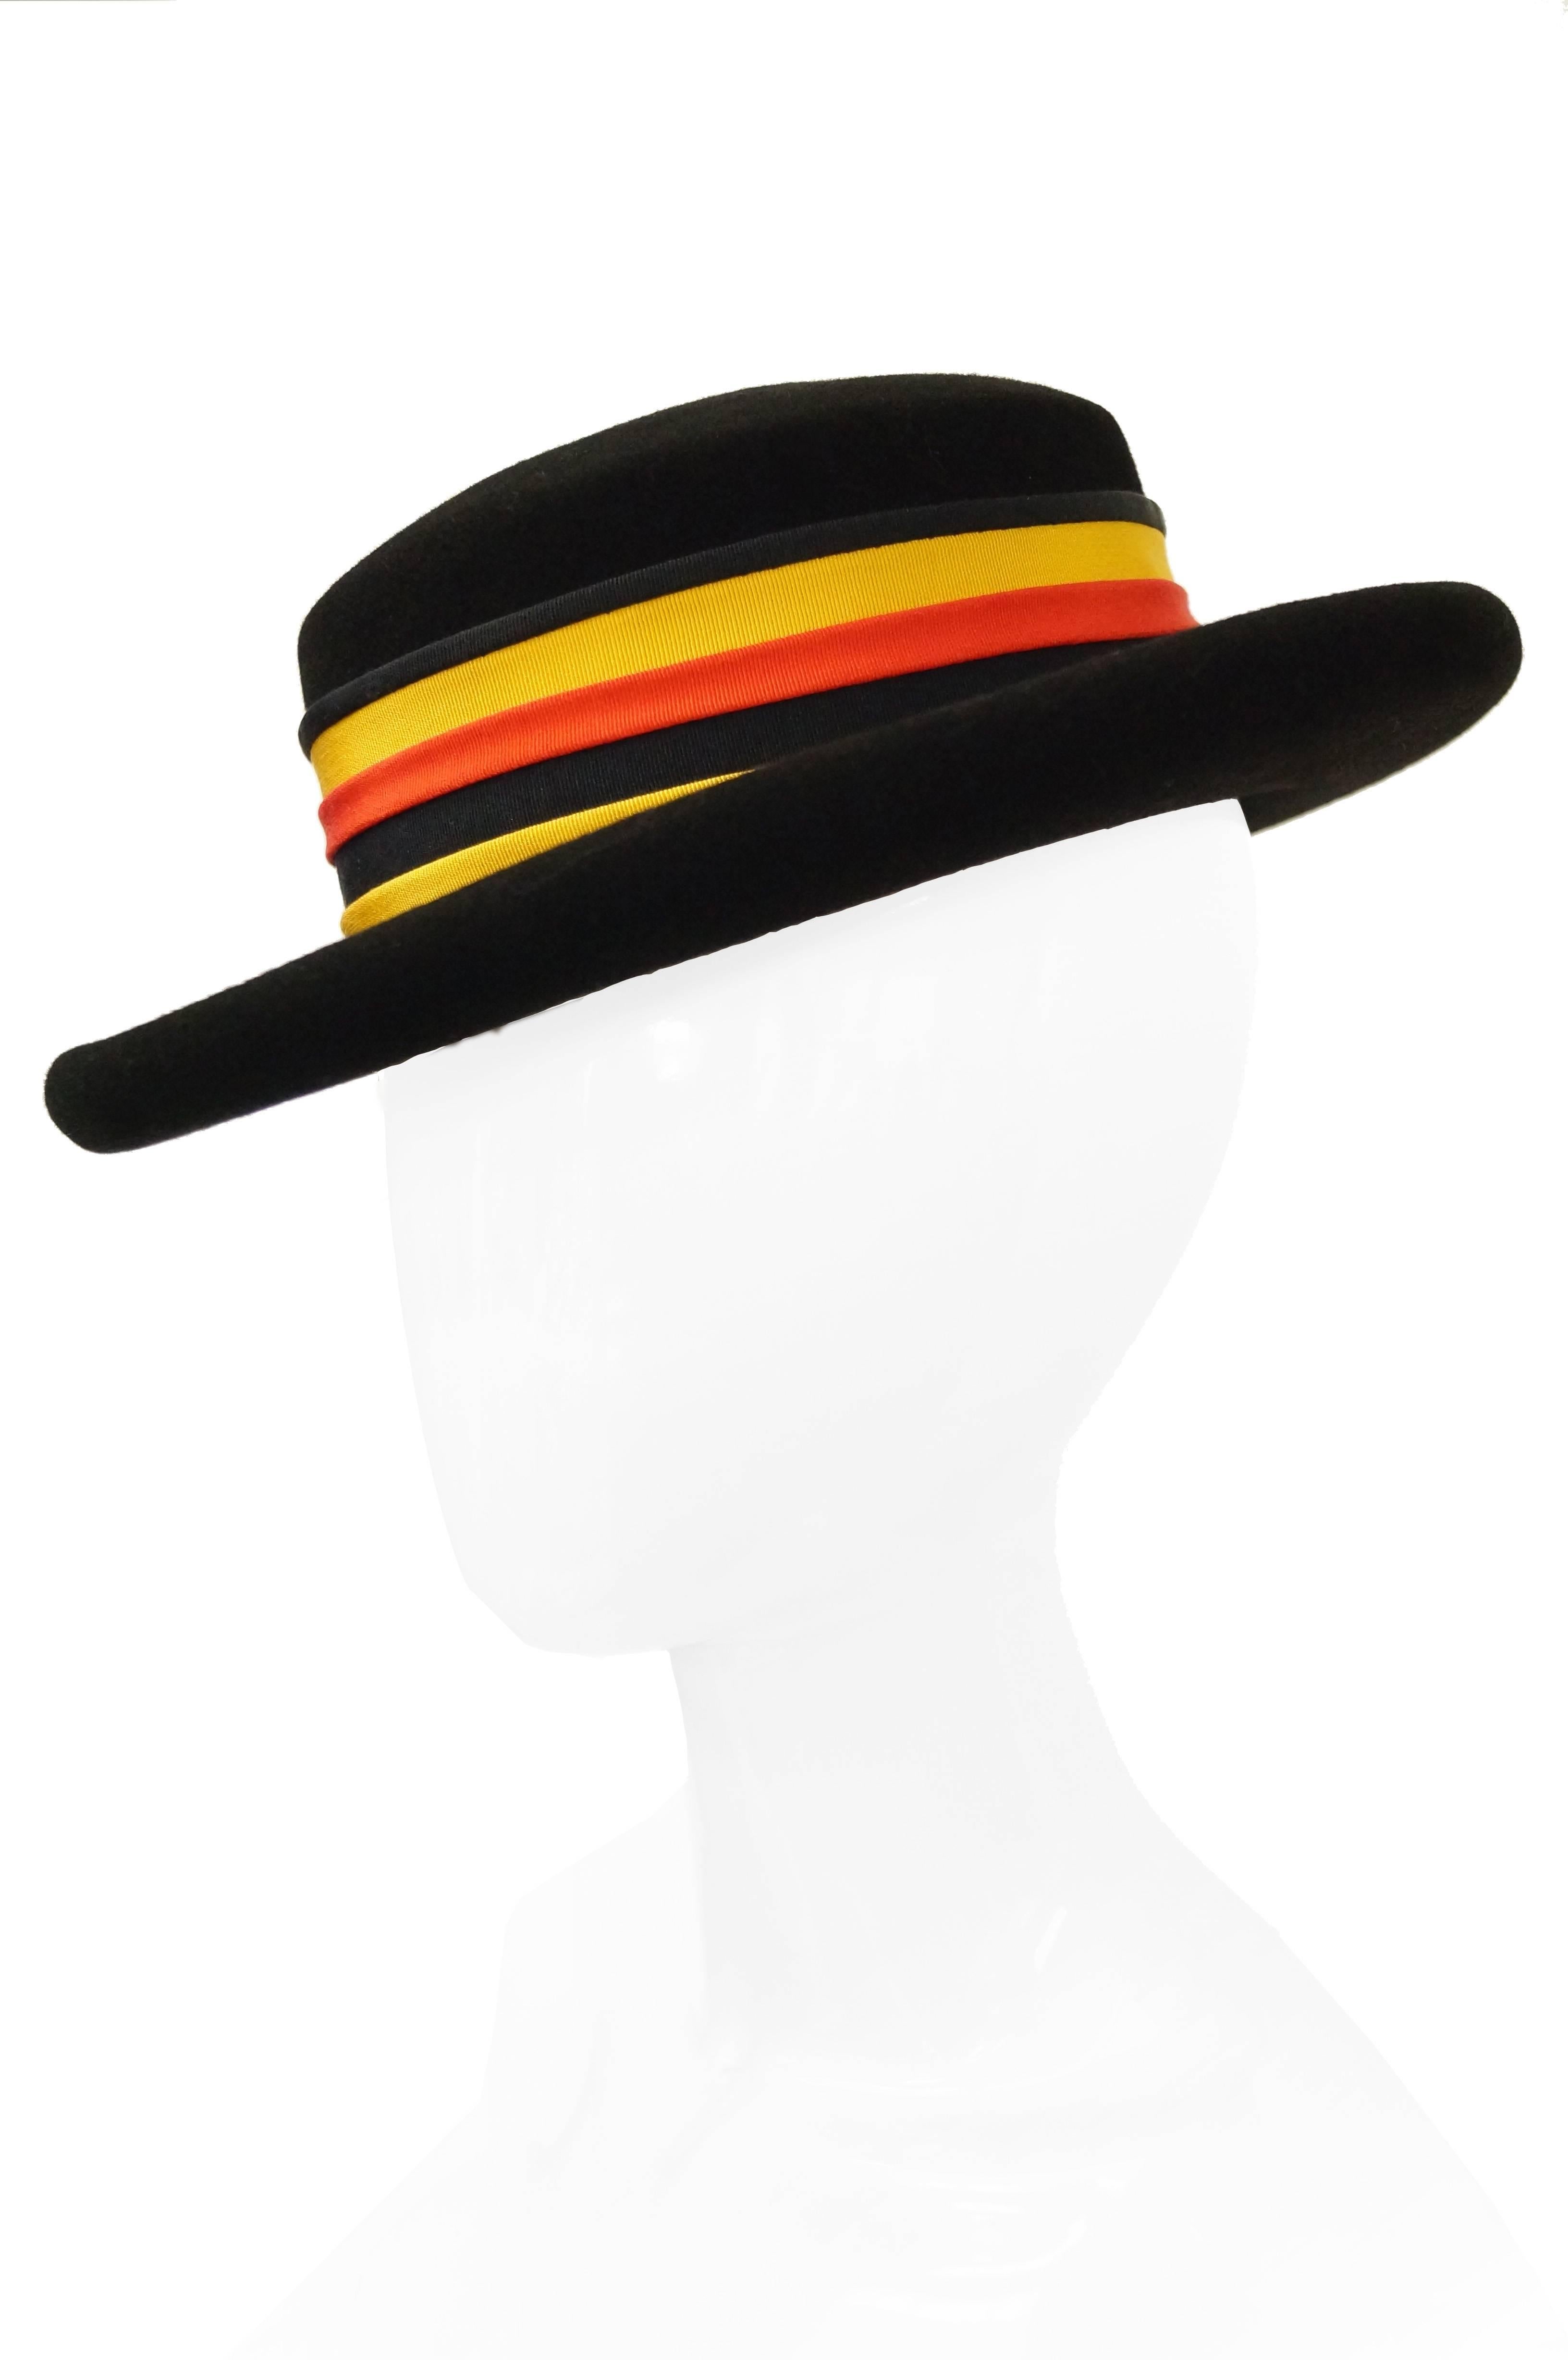 Understated medium width brim hat by Adolfo. The hat is somewhat similar to a boaters hat, although with a thick curled brim, and a circular, rounded crown. The hat is topped off with a wide ribbon band in red, orange, and black. Spectacular!


